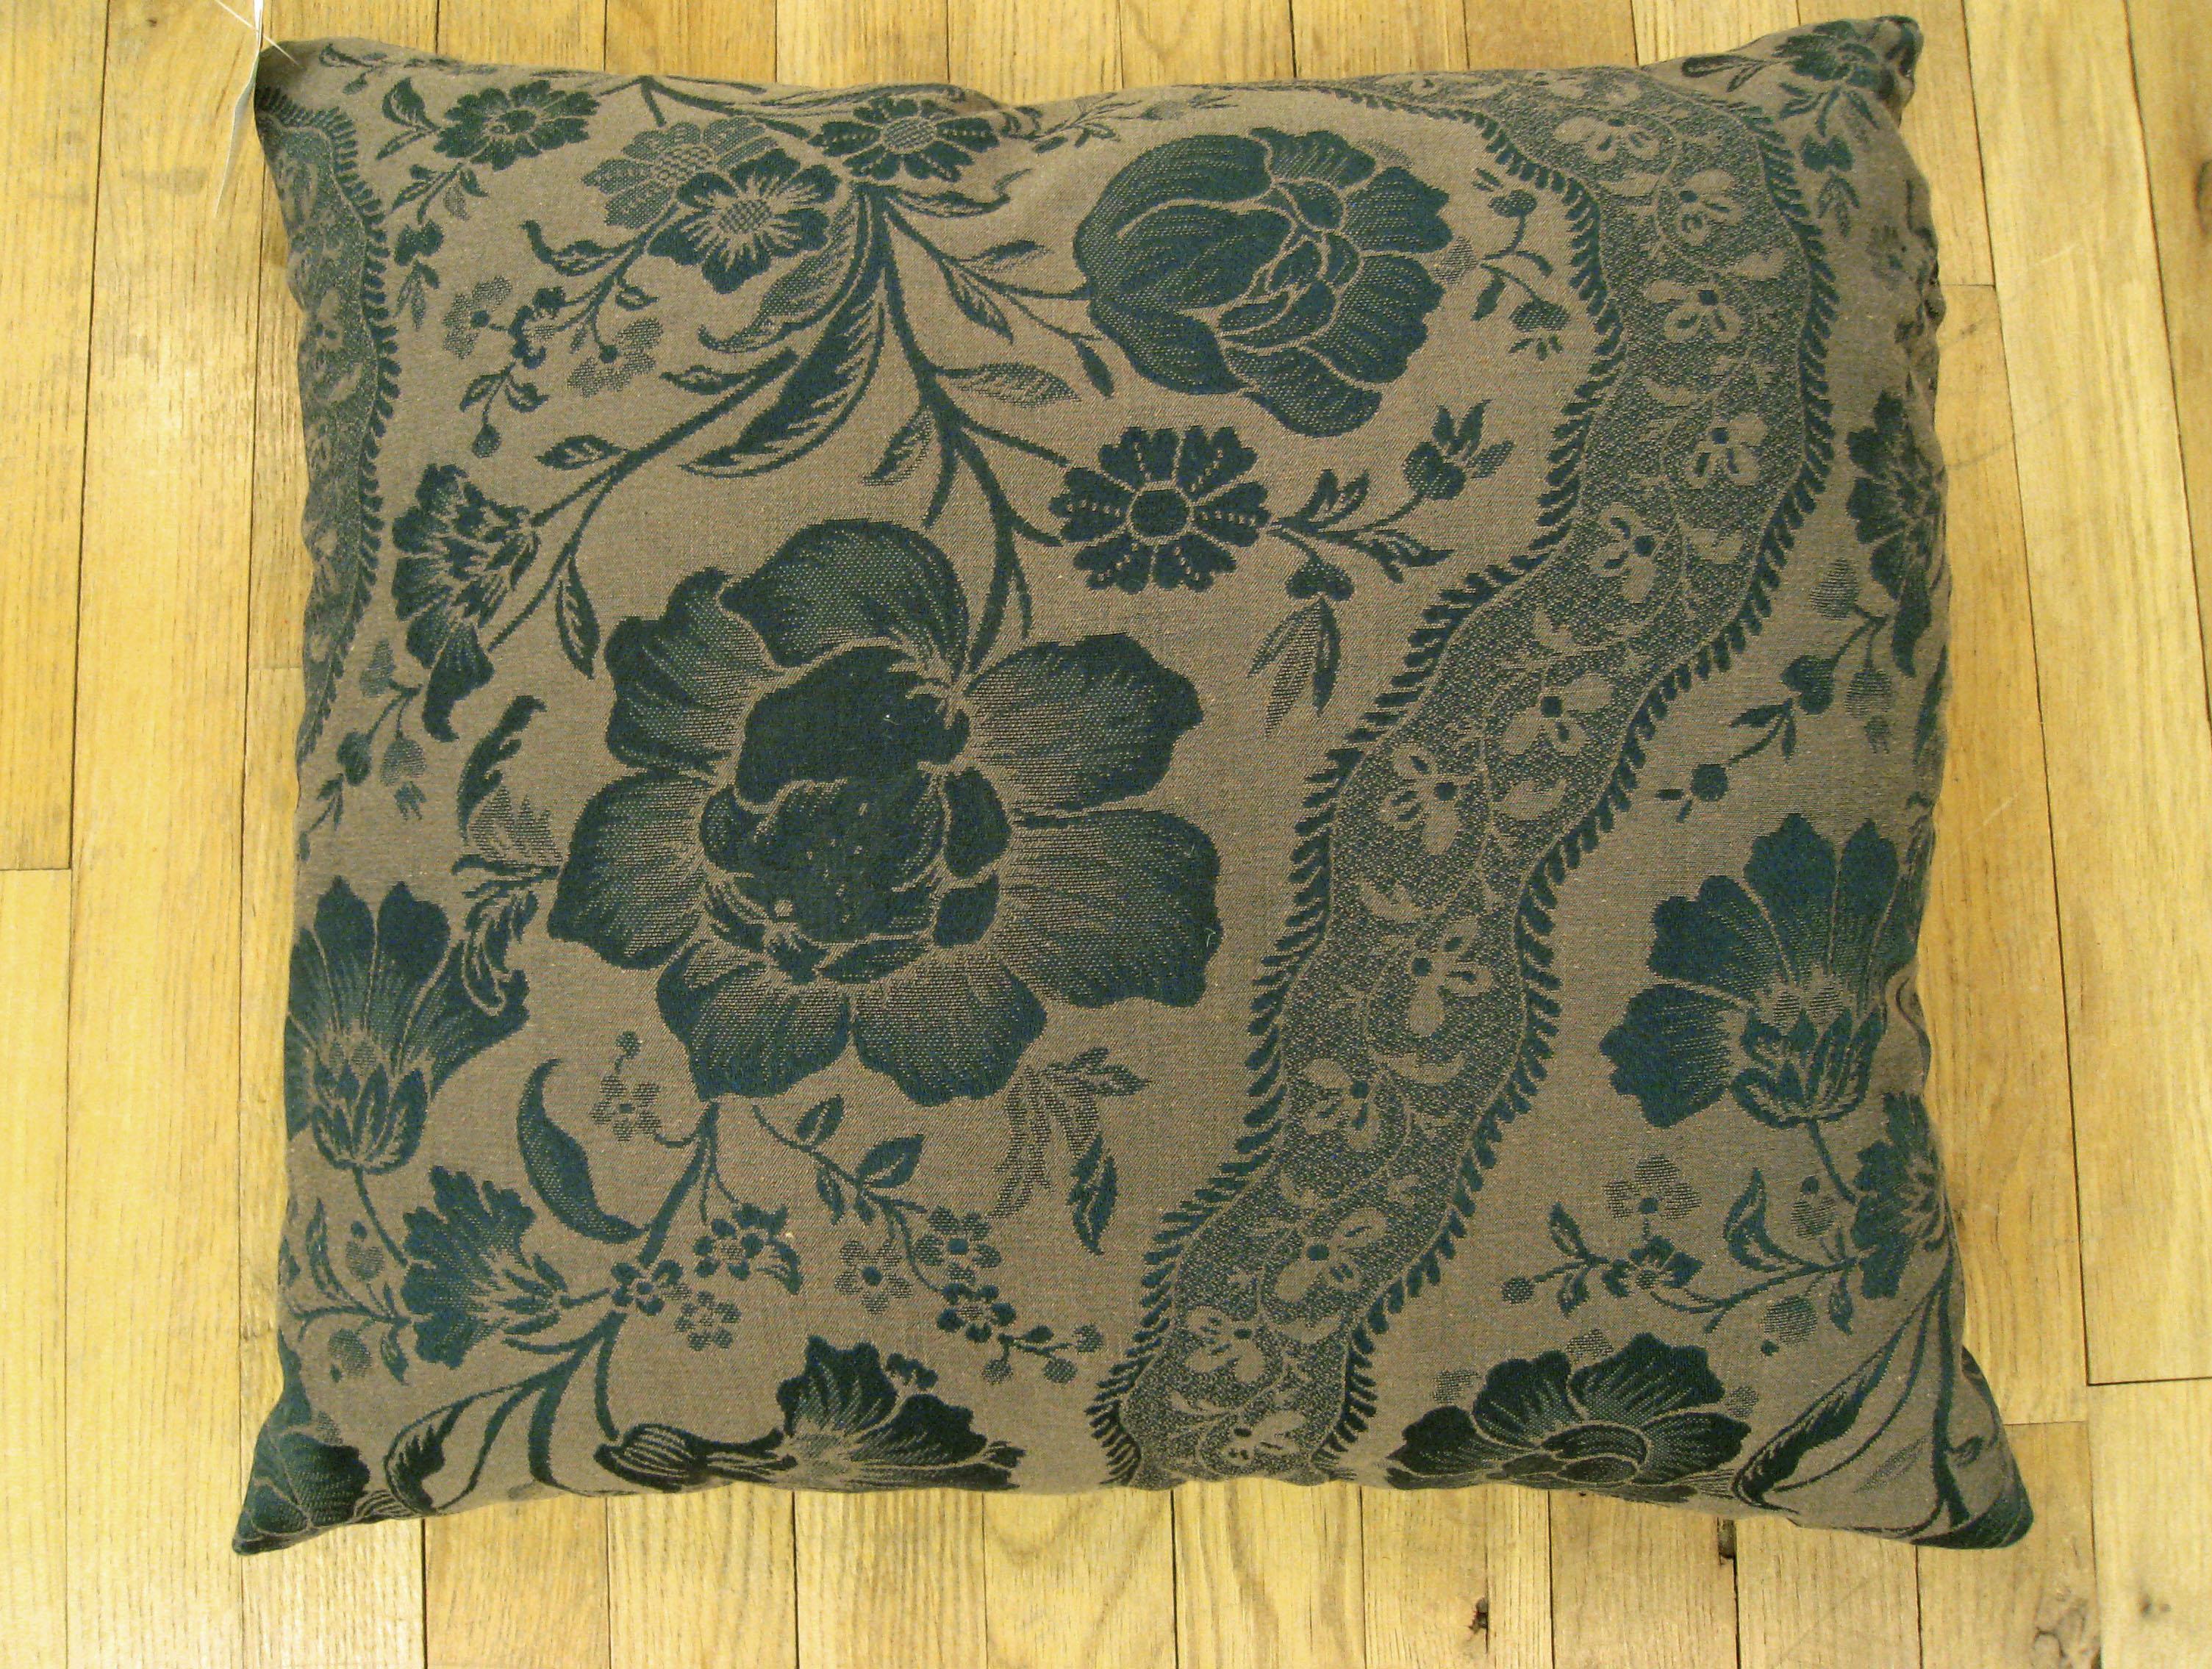 A vintage decorative pillow with a directional floral pattern, size 22